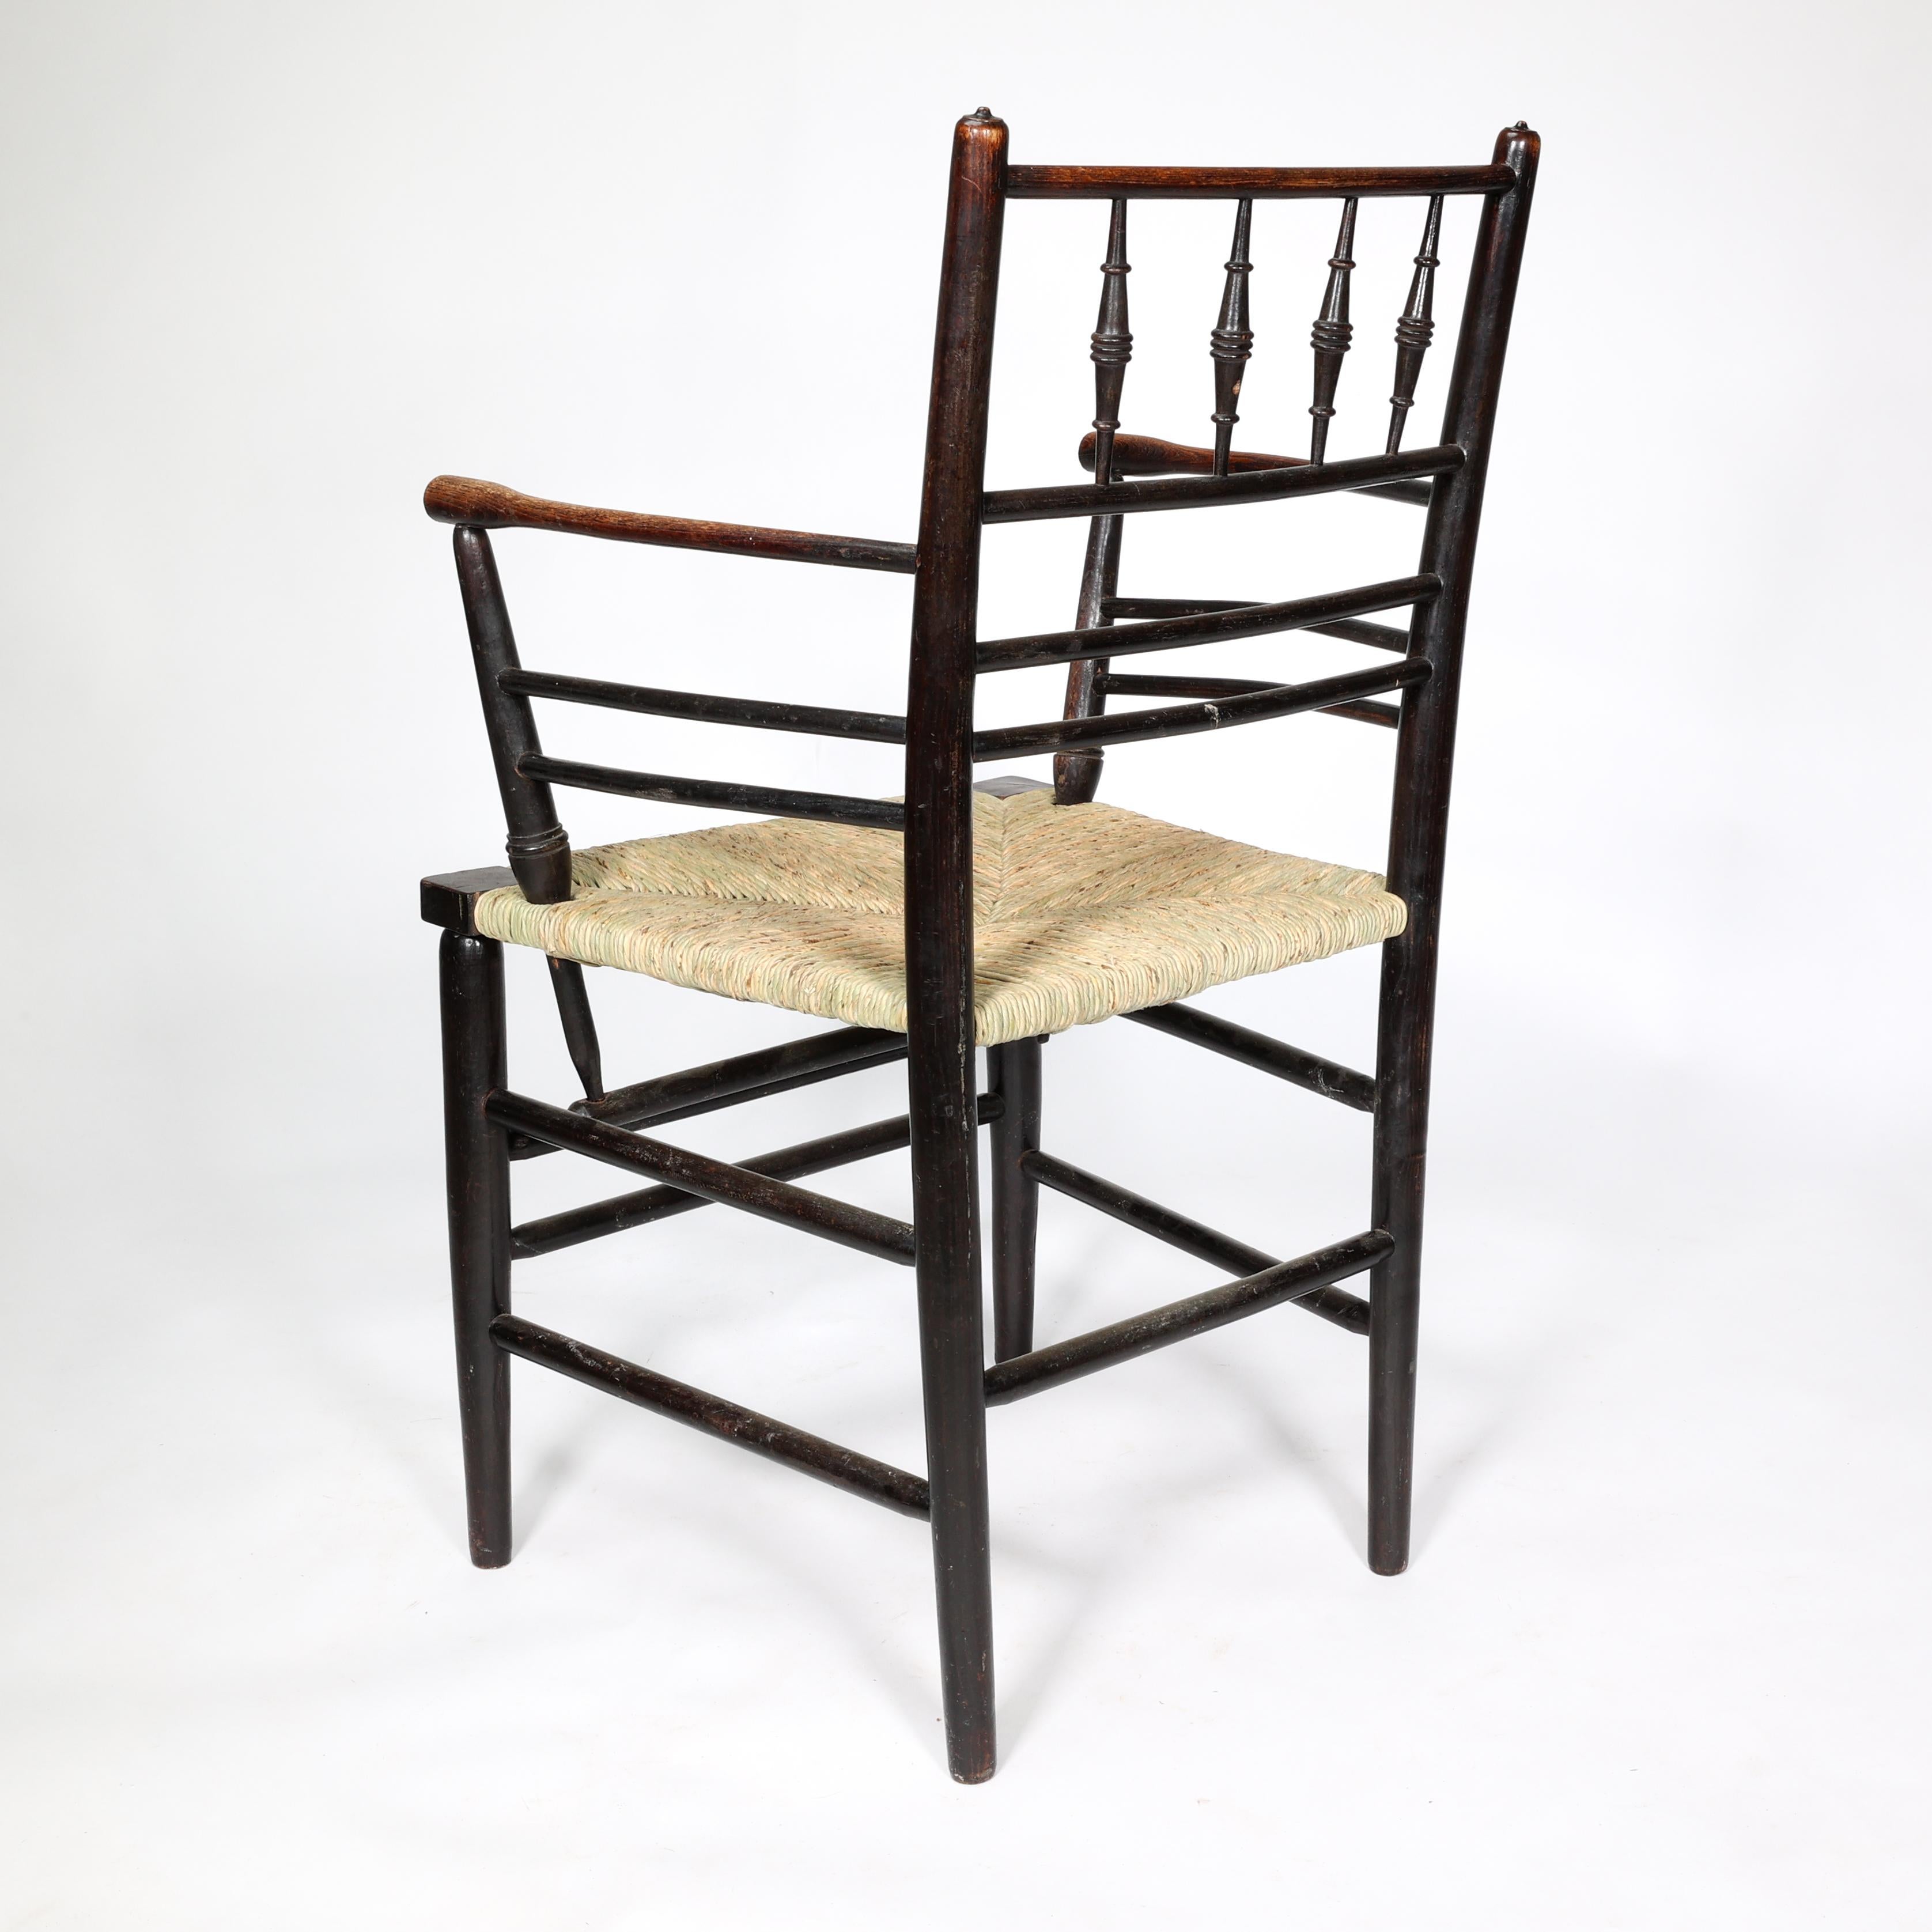 William Morris, A Classic Arts & Crafts Ebonised Armchair from the Sussex Range. 6